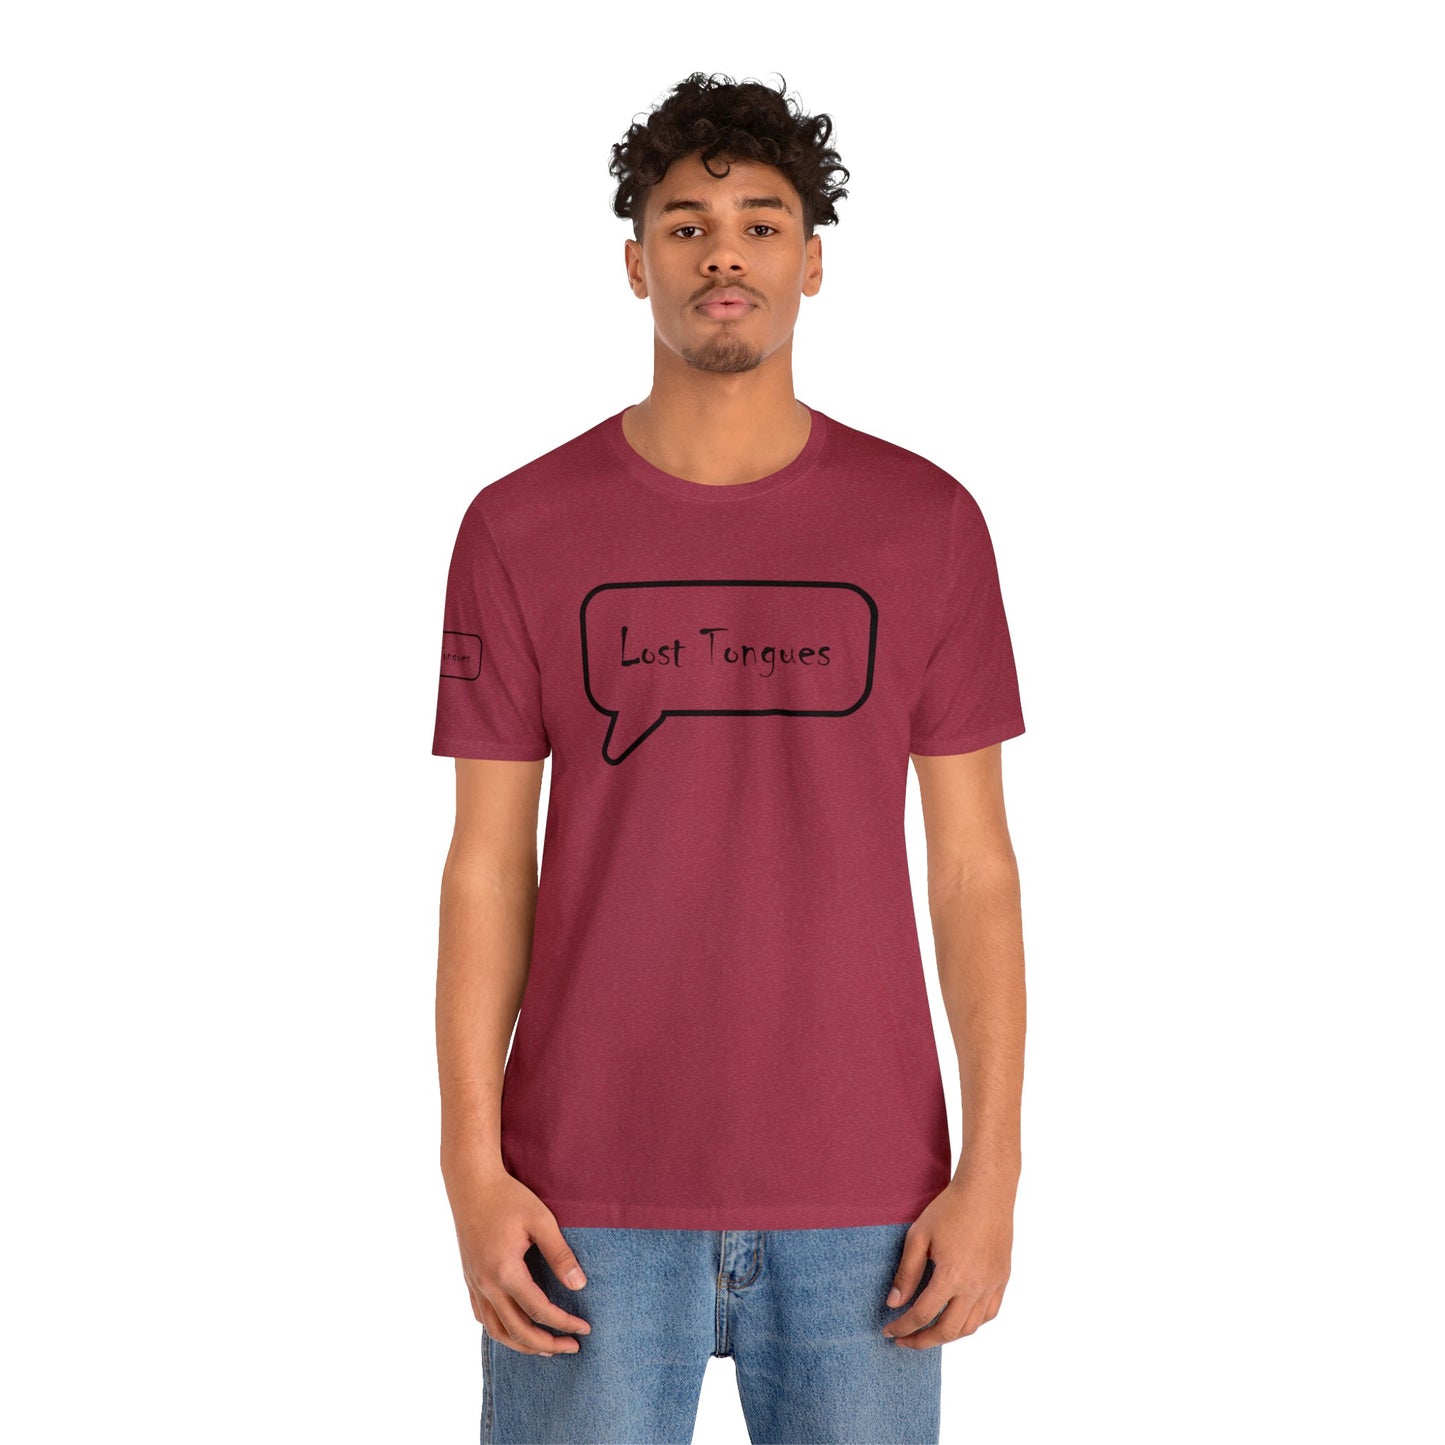 Lost Tongues Unisex Jersey Short Sleeve Tee